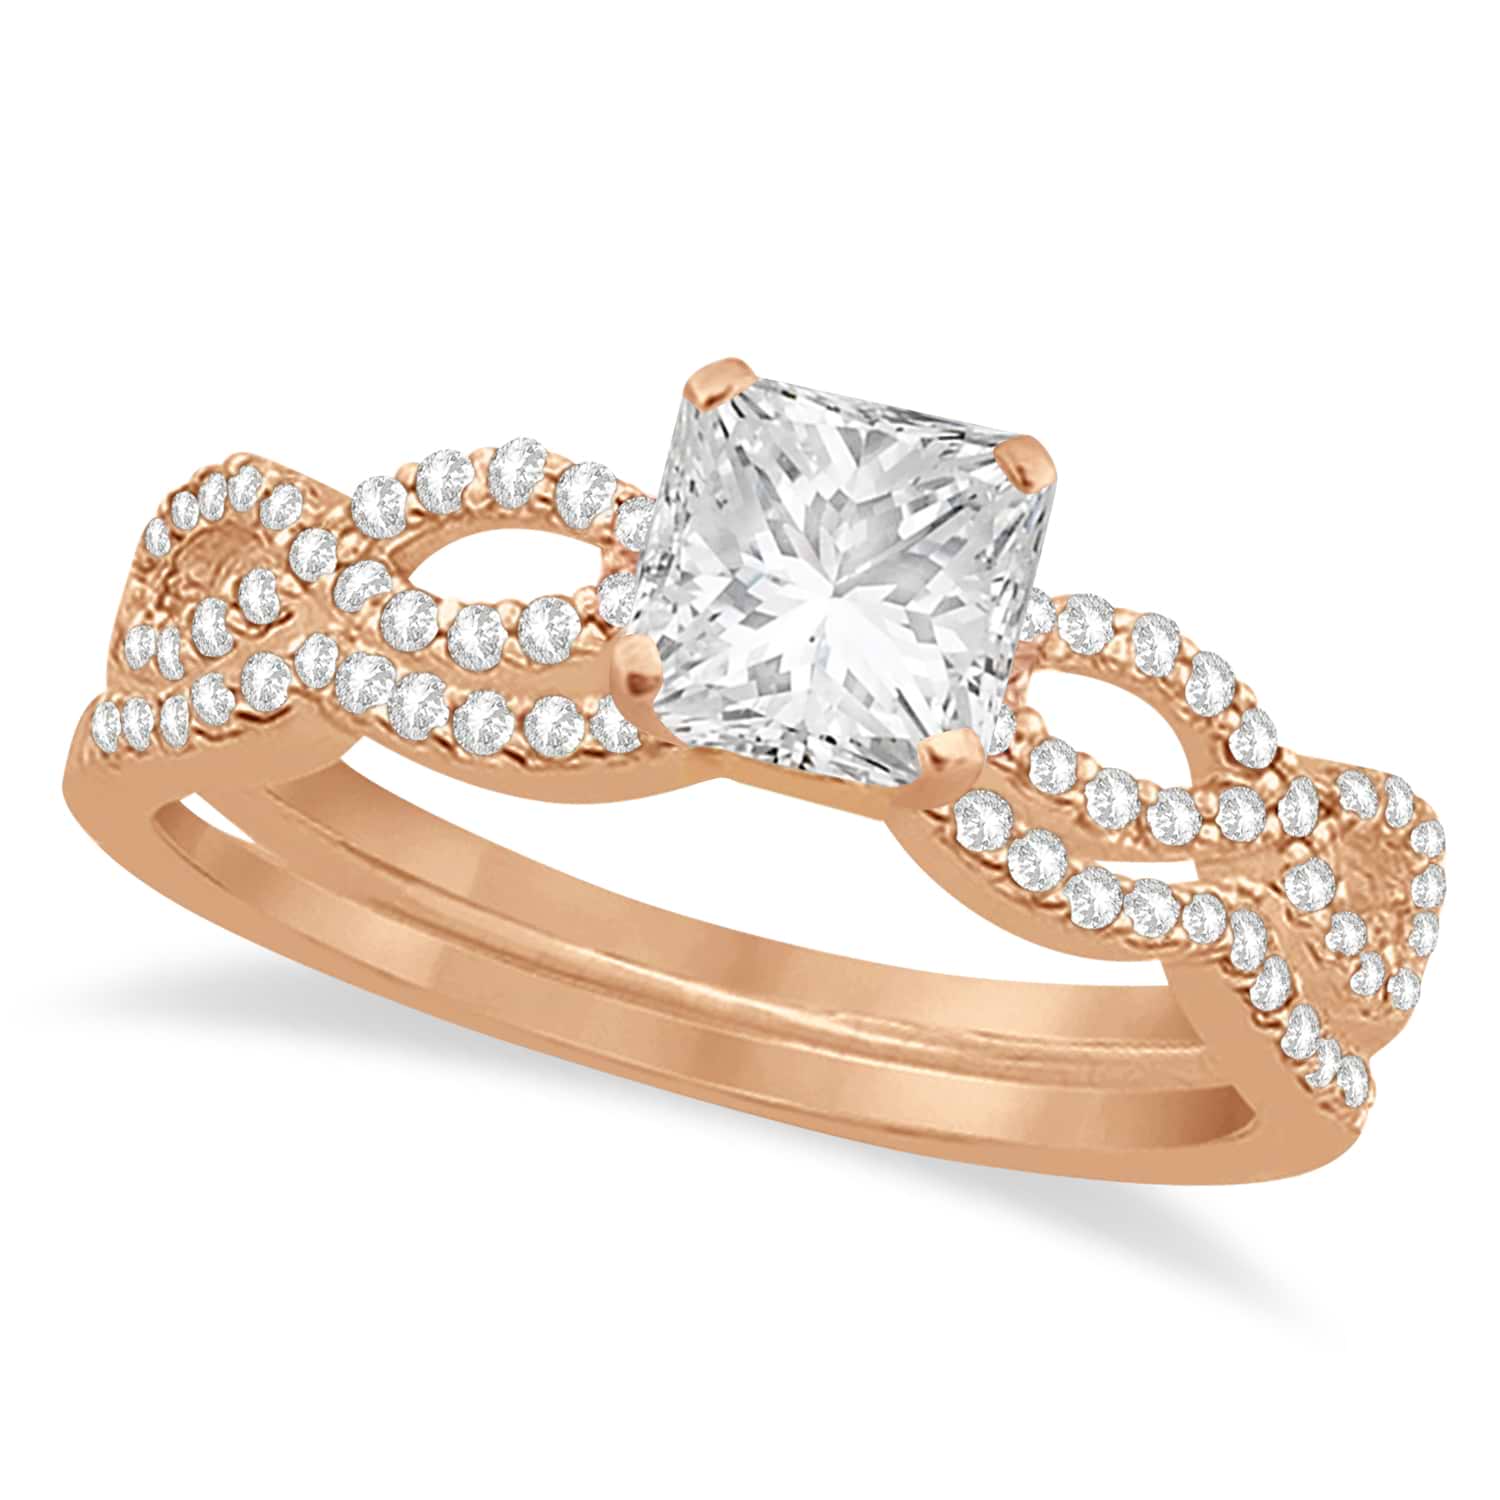 Lauren B Jewelry | NYC Jewelry Store - Engagement Rings & Wedding Bands